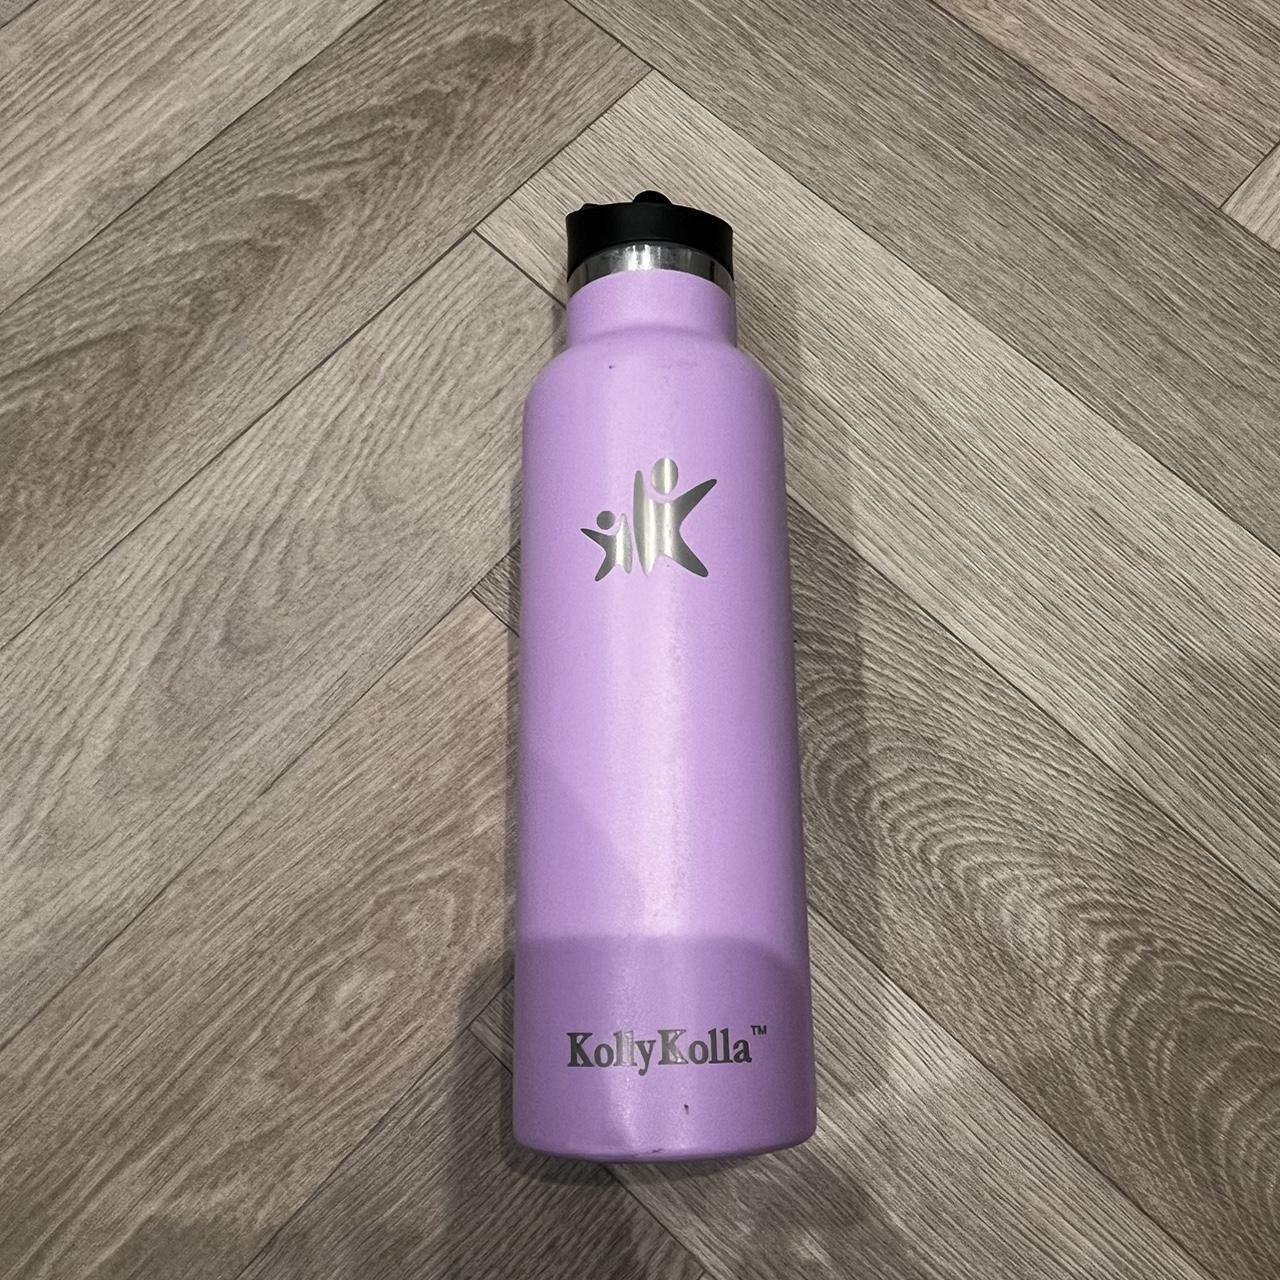 Limited Edition Hydroflask “nude” “brown” “tan”